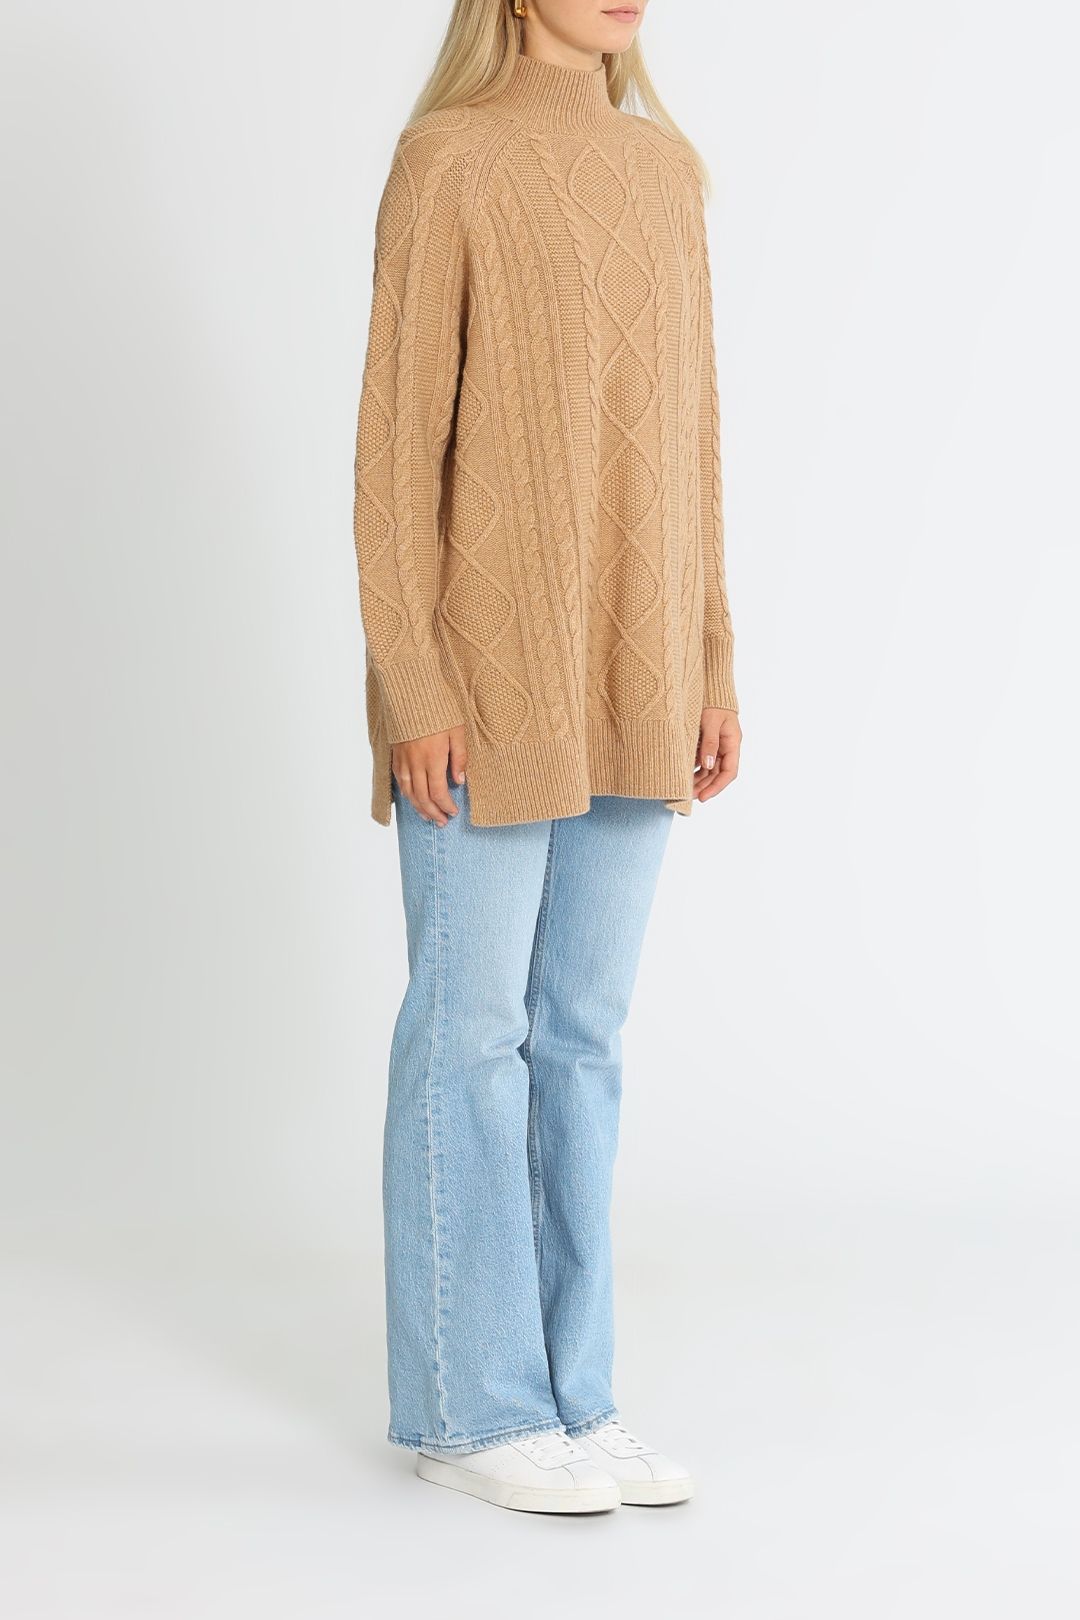 Reiss Nina Cable Tunic High Neck